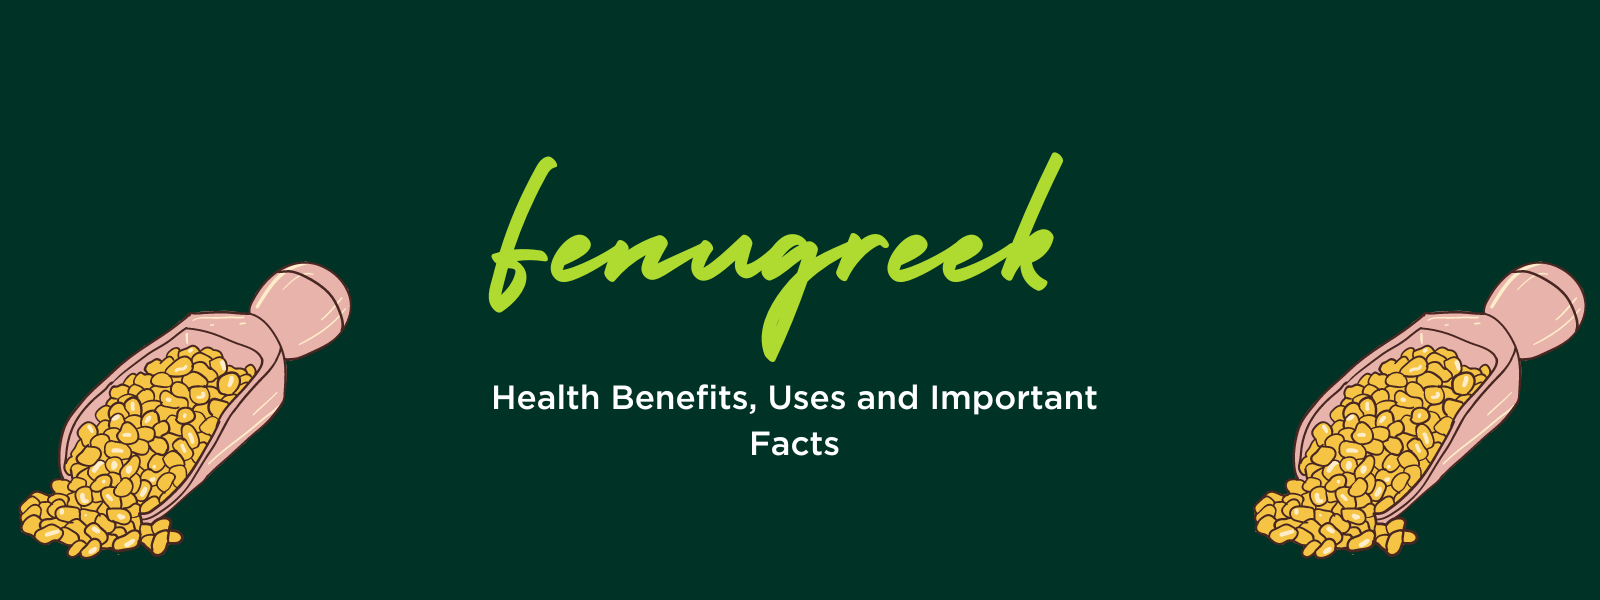 Fenugreek: Health Benefits, Uses and Important Facts